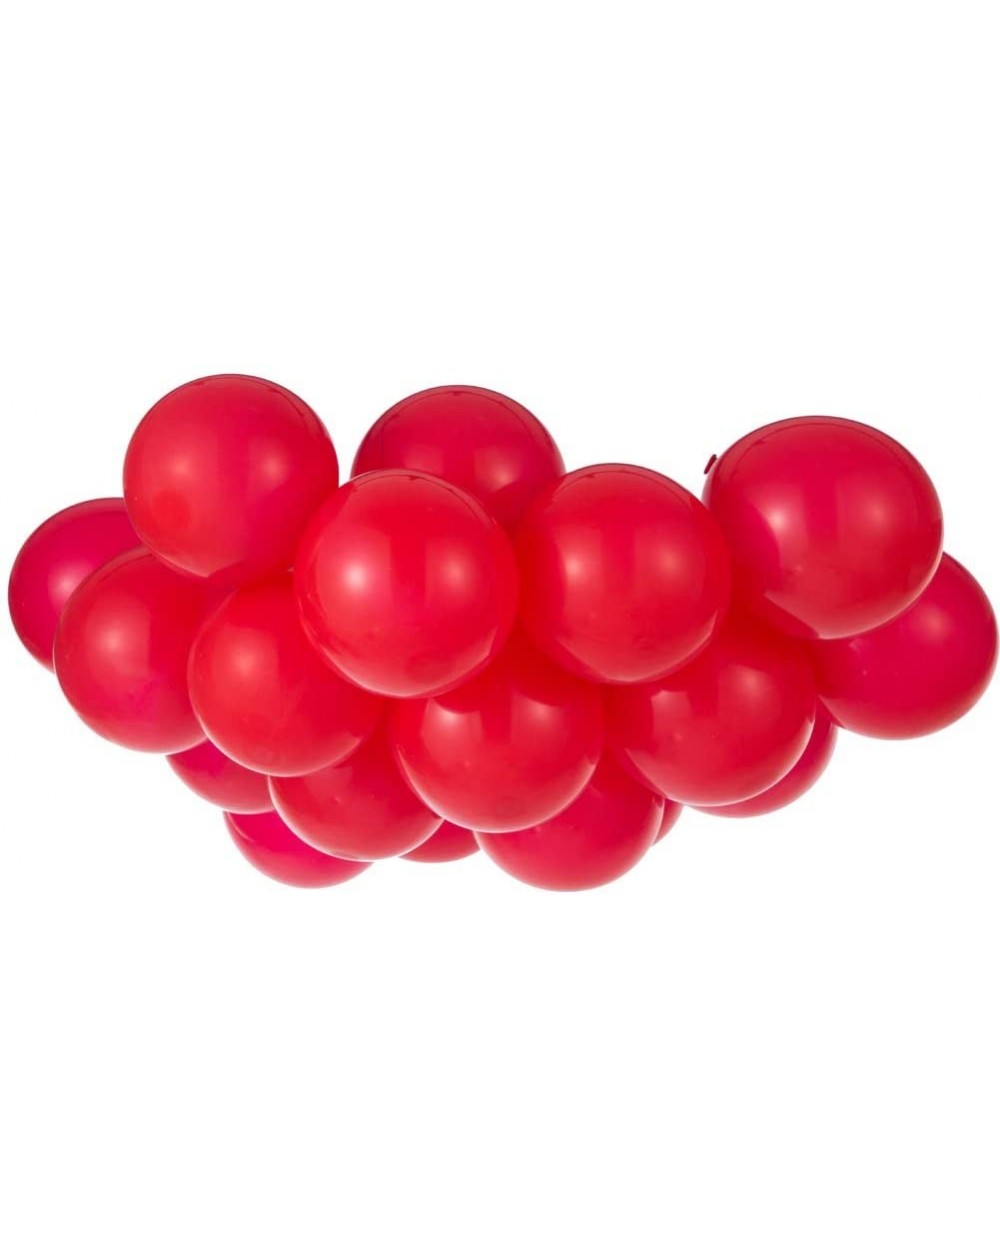 Balloons 5 Inches Red Latex Balloons Party Decorations- Pack of 200 - 5" Red 200 Pcs - CY18LYH528S $21.55